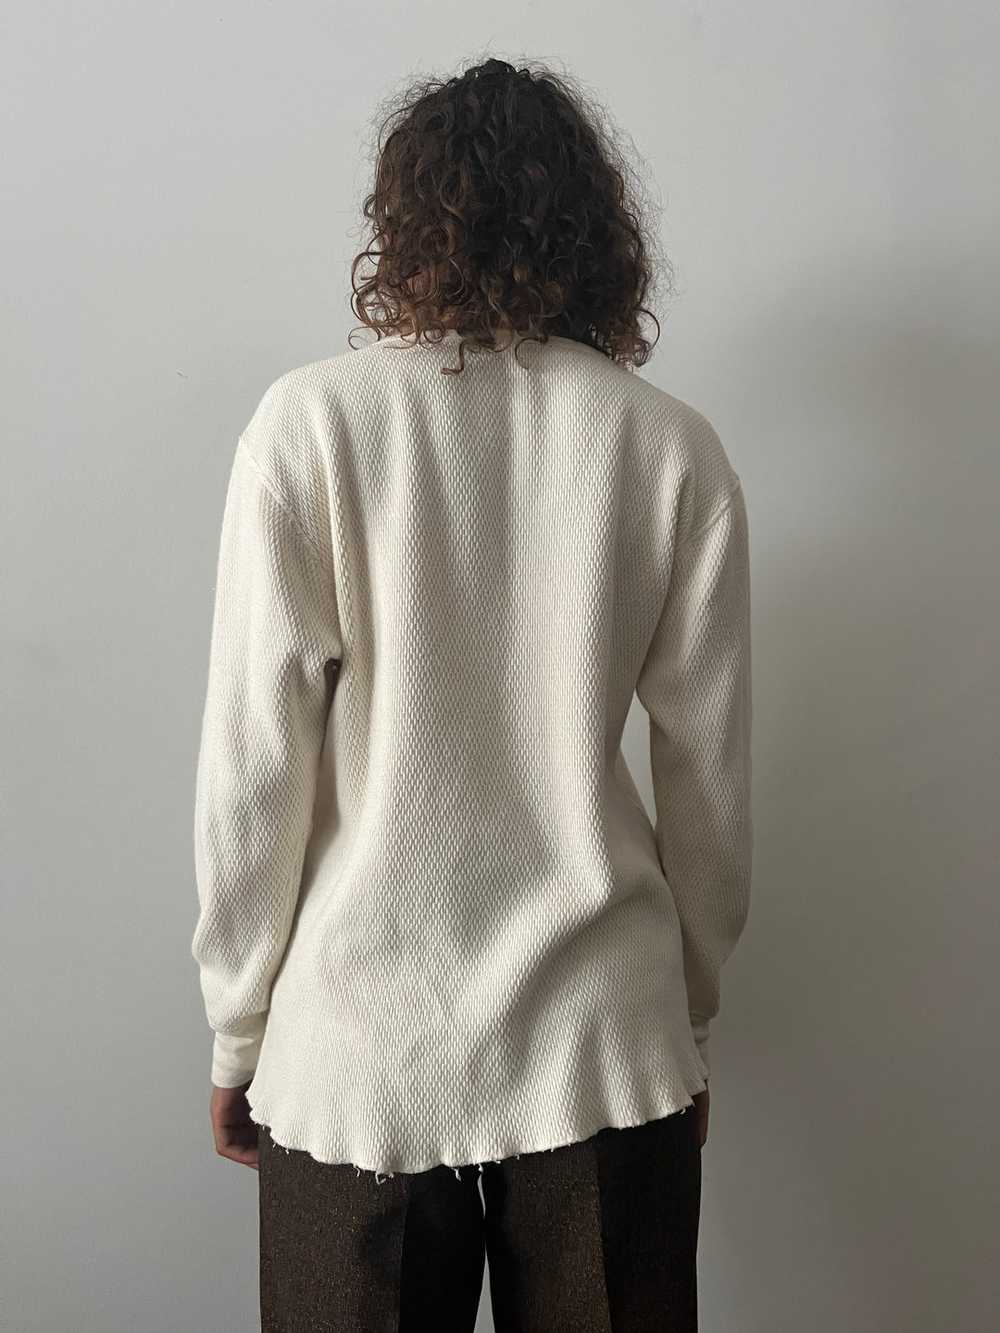 70s/80s Cotton Thermal Shirt - image 3